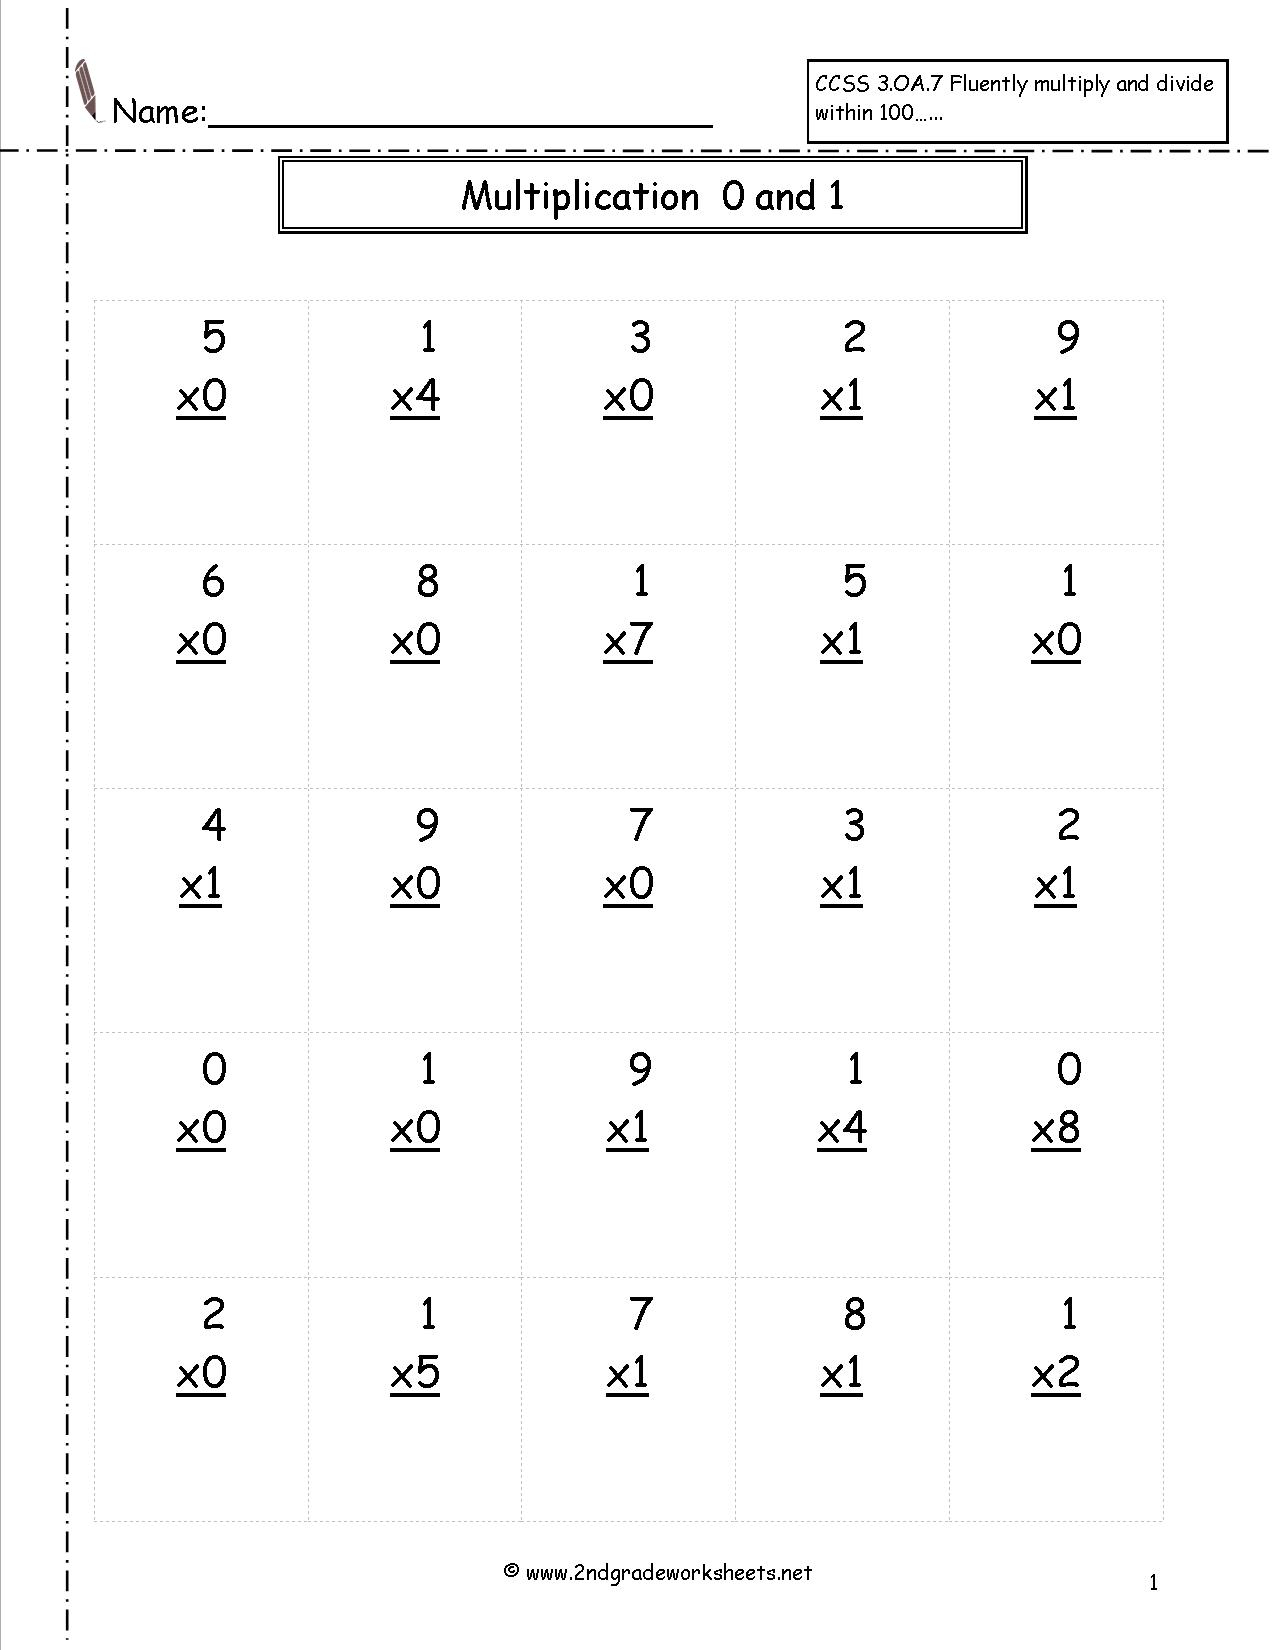 Multiplication Worksheets And Printouts with regard to 0 Multiplication Worksheets